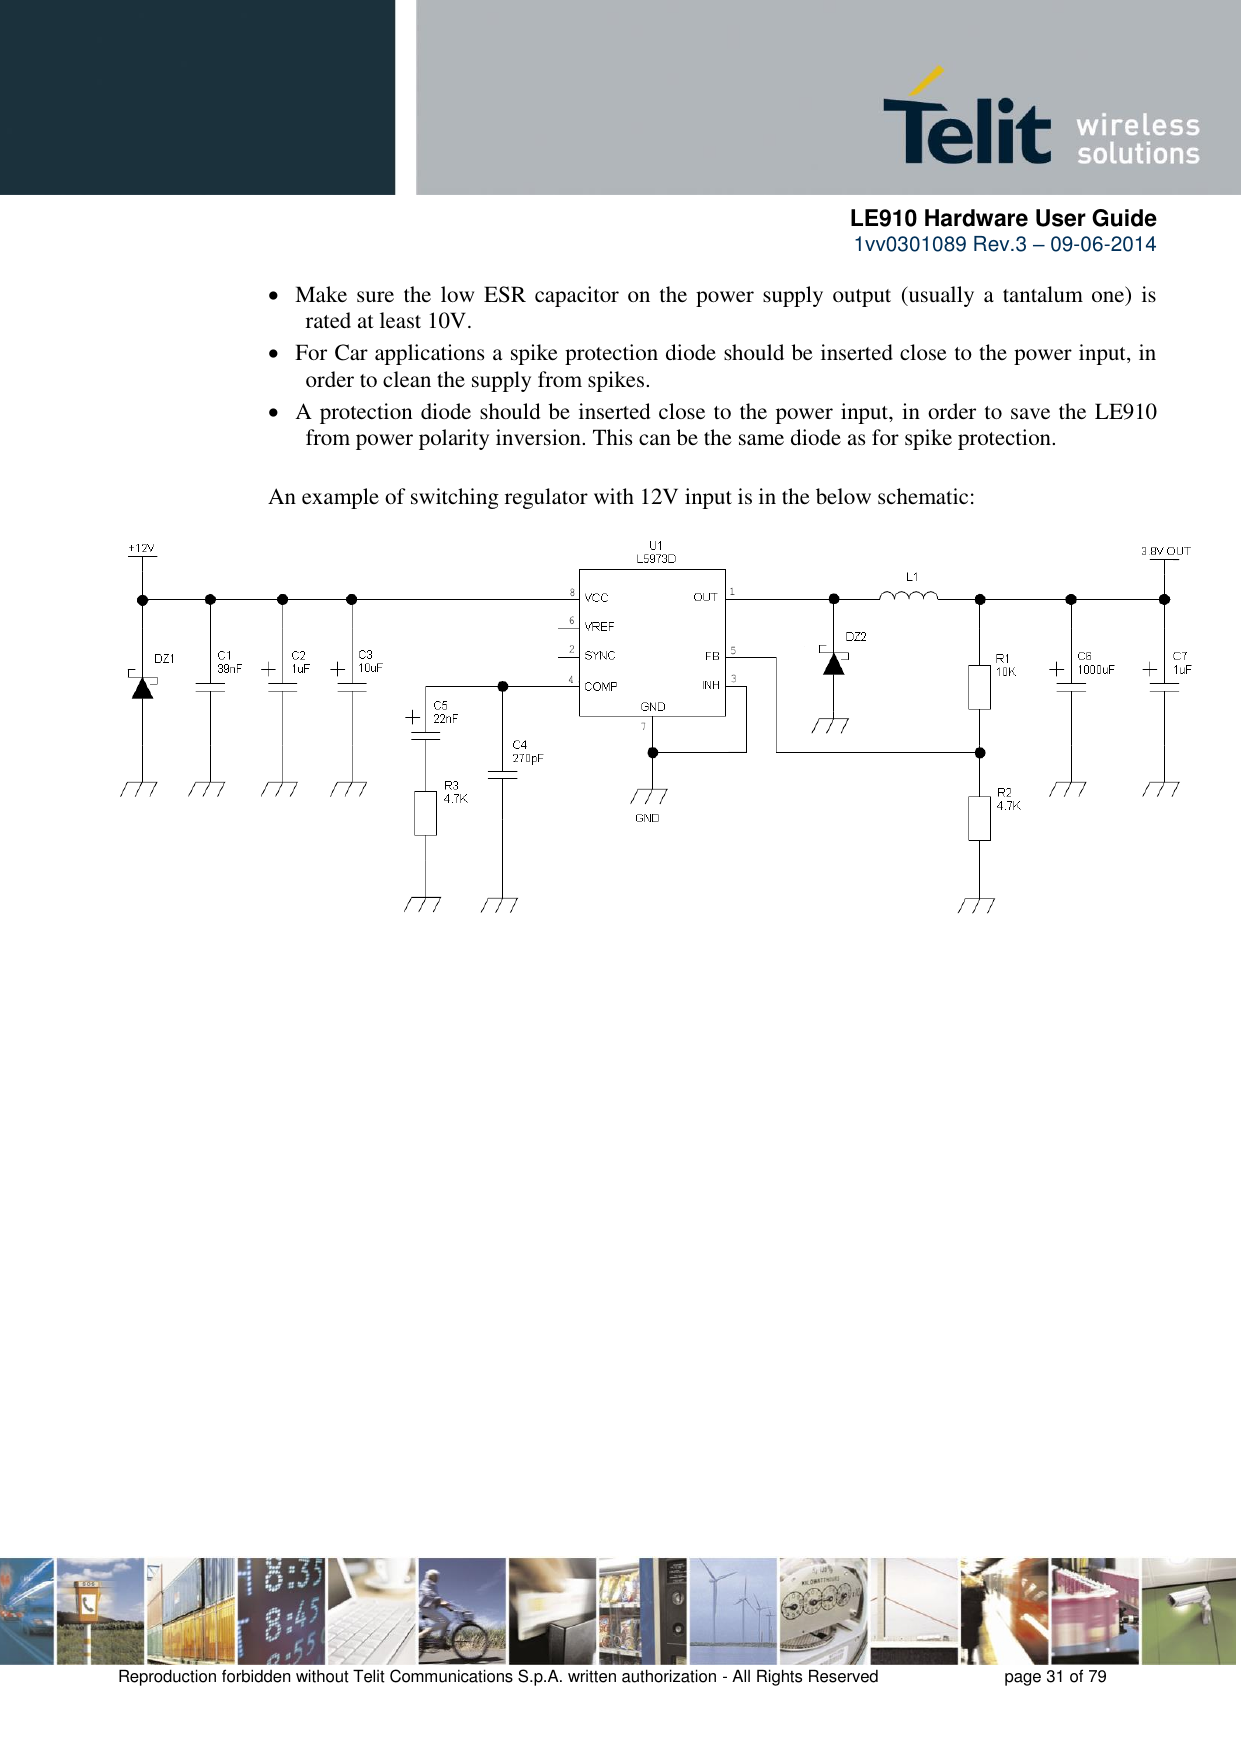      LE910 Hardware User Guide 1vv0301089 Rev.3 – 09-06-2014    Reproduction forbidden without Telit Communications S.p.A. written authorization - All Rights Reserved    page 31 of 79   Make sure  the low ESR capacitor on the  power supply output (usually a tantalum one)  is rated at least 10V.  For Car applications a spike protection diode should be inserted close to the power input, in order to clean the supply from spikes.   A protection diode should be inserted close to the power input, in order to save the LE910 from power polarity inversion. This can be the same diode as for spike protection. An example of switching regulator with 12V input is in the below schematic: 